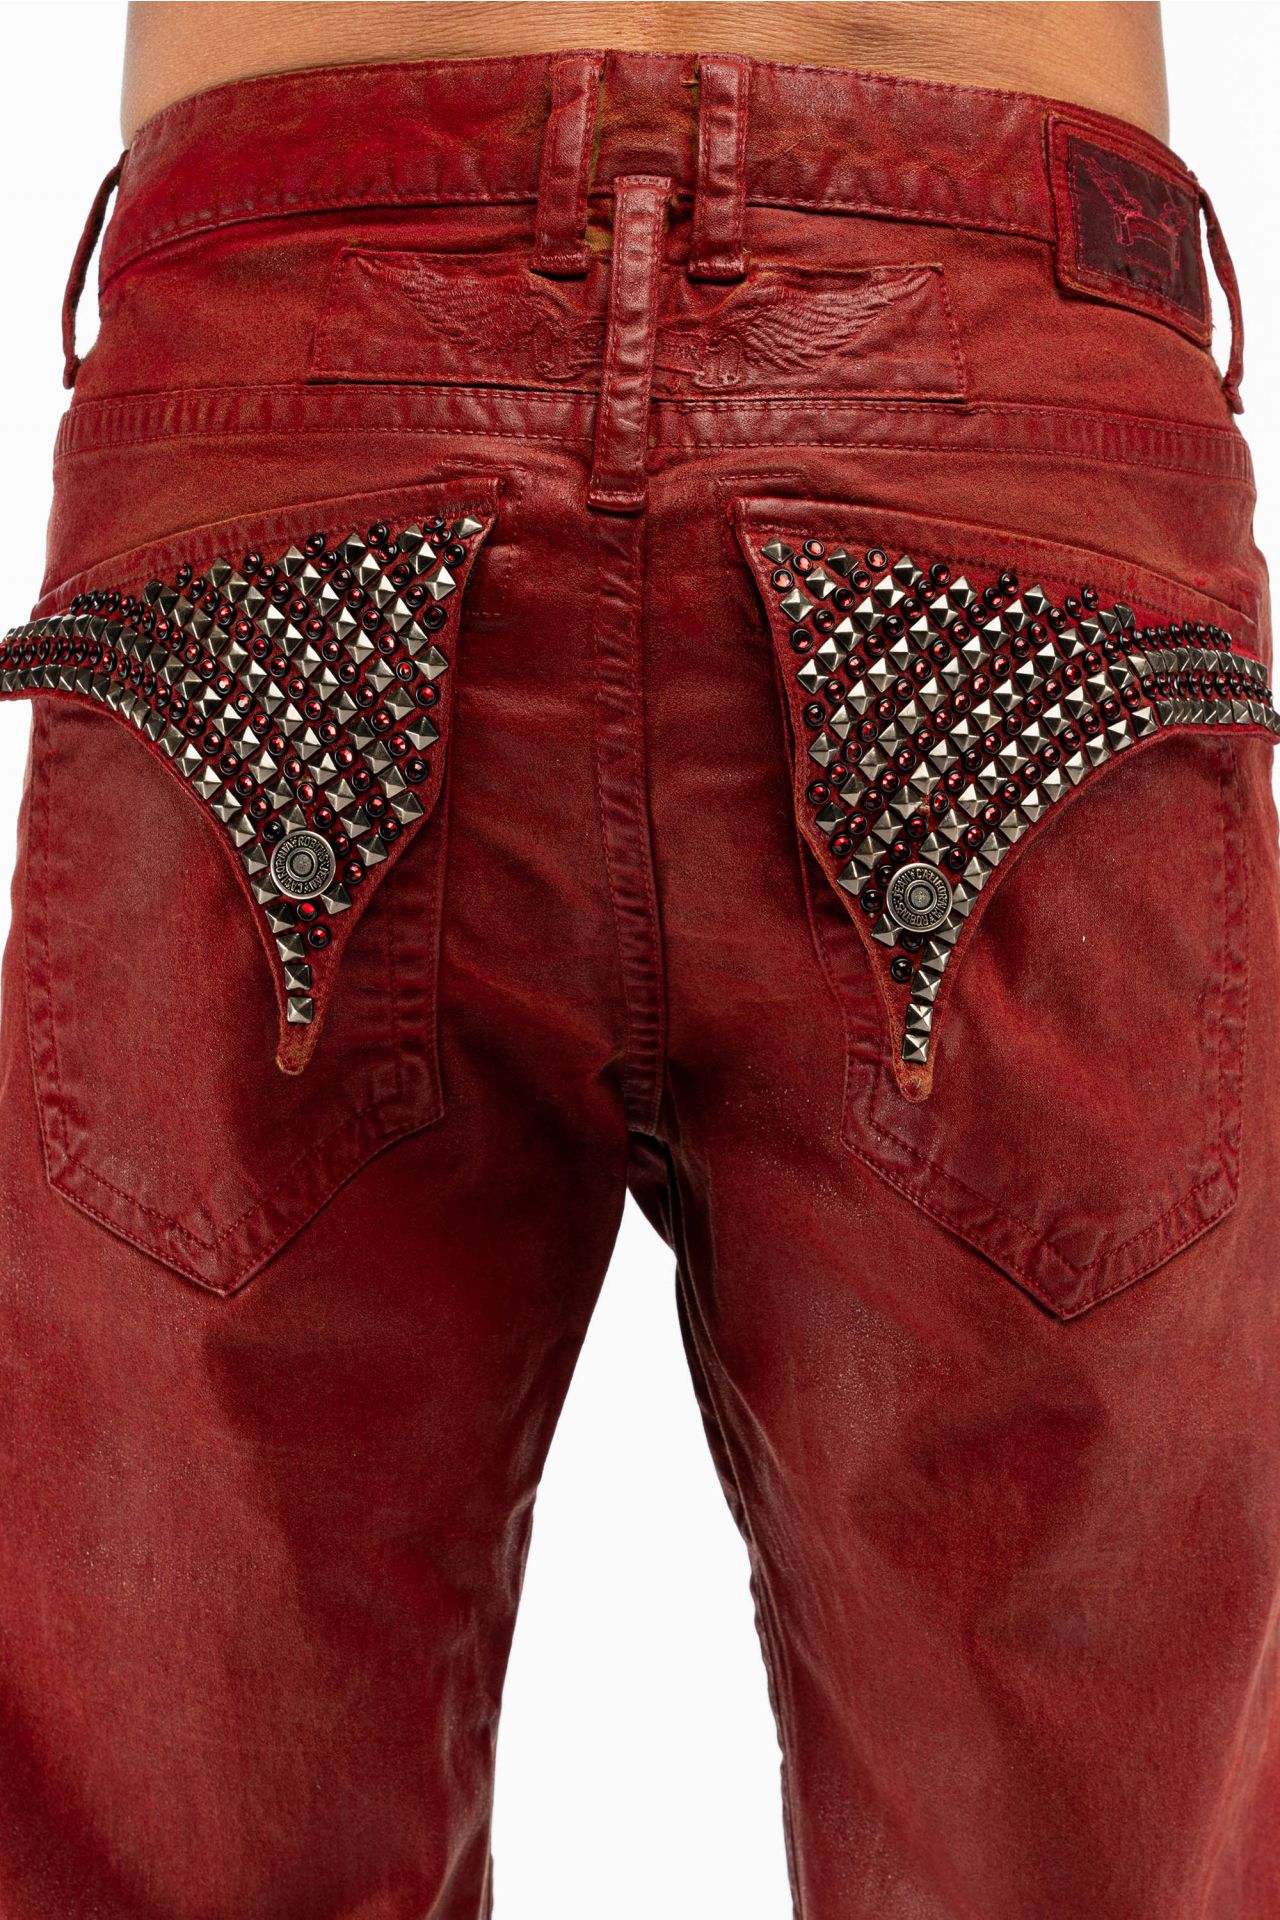 LONG FLAP MENS JEANS IN CUIR RED WITH STUDS AND CRYSTALS